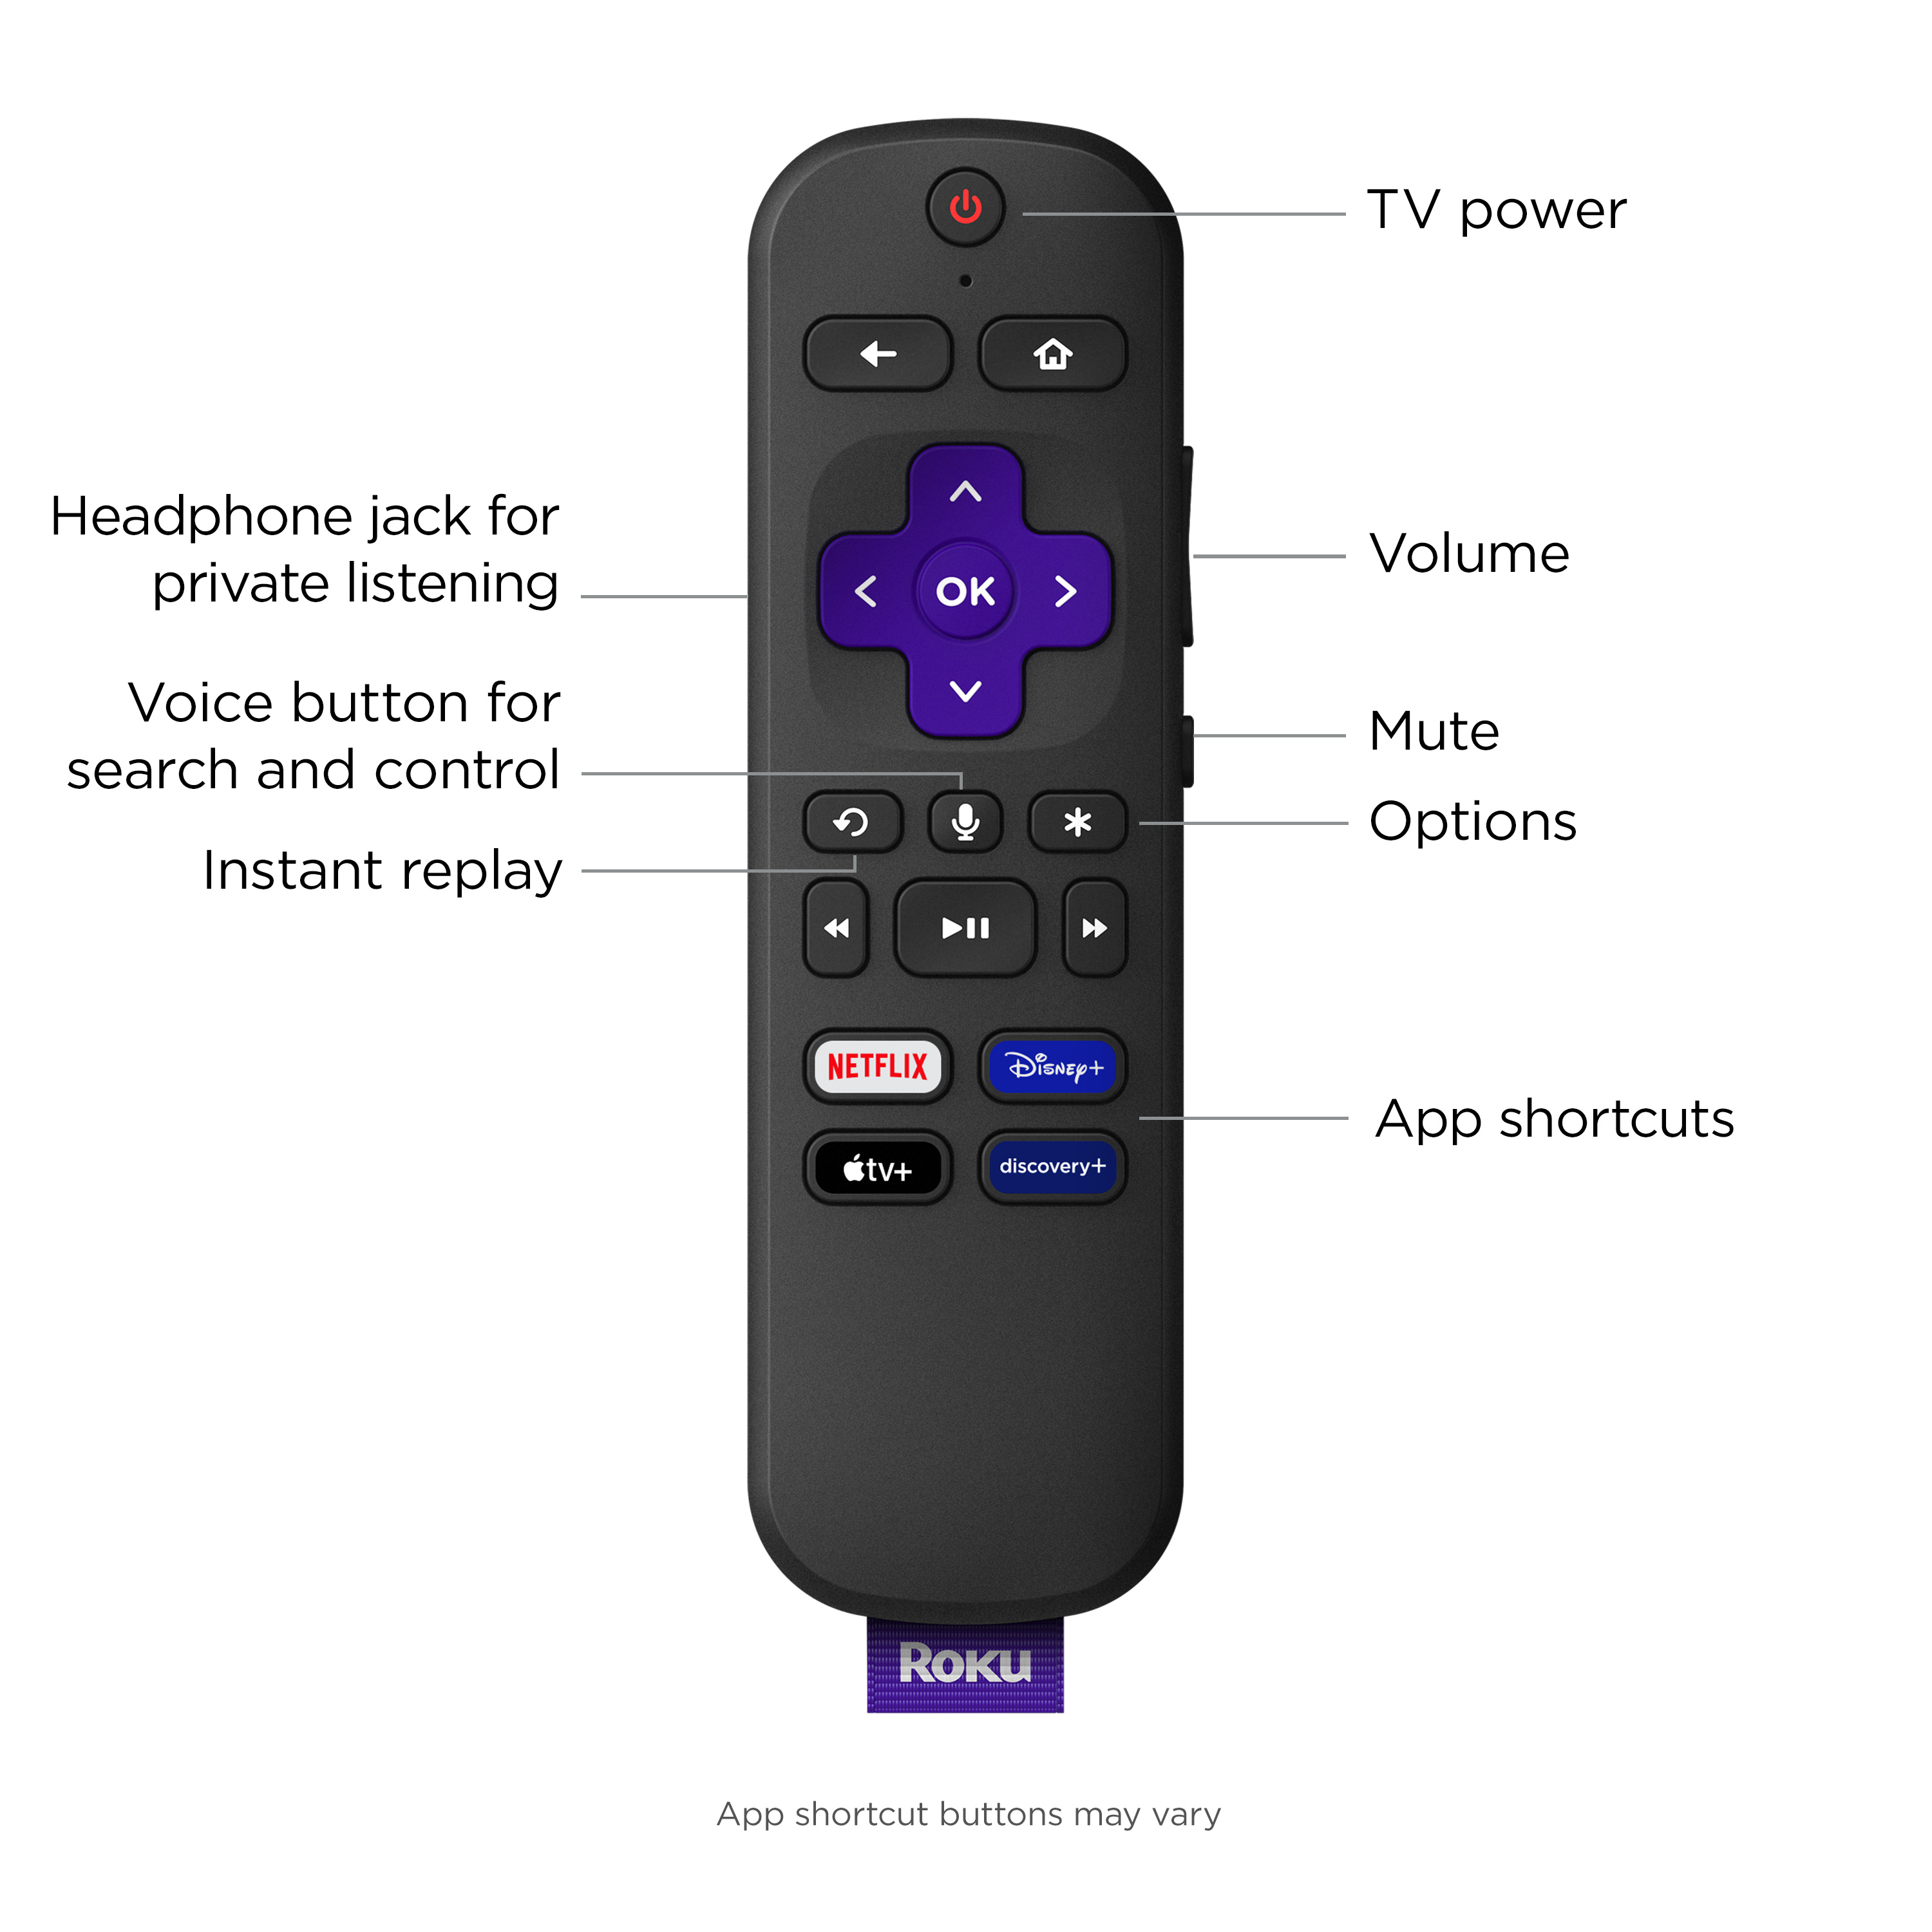 Roku Ultra LT Streaming Device 4K/HDR/Dolby Vision/Dual-Band Wi-Fi® with Roku Voice Remote and HDMI Cable - image 5 of 11